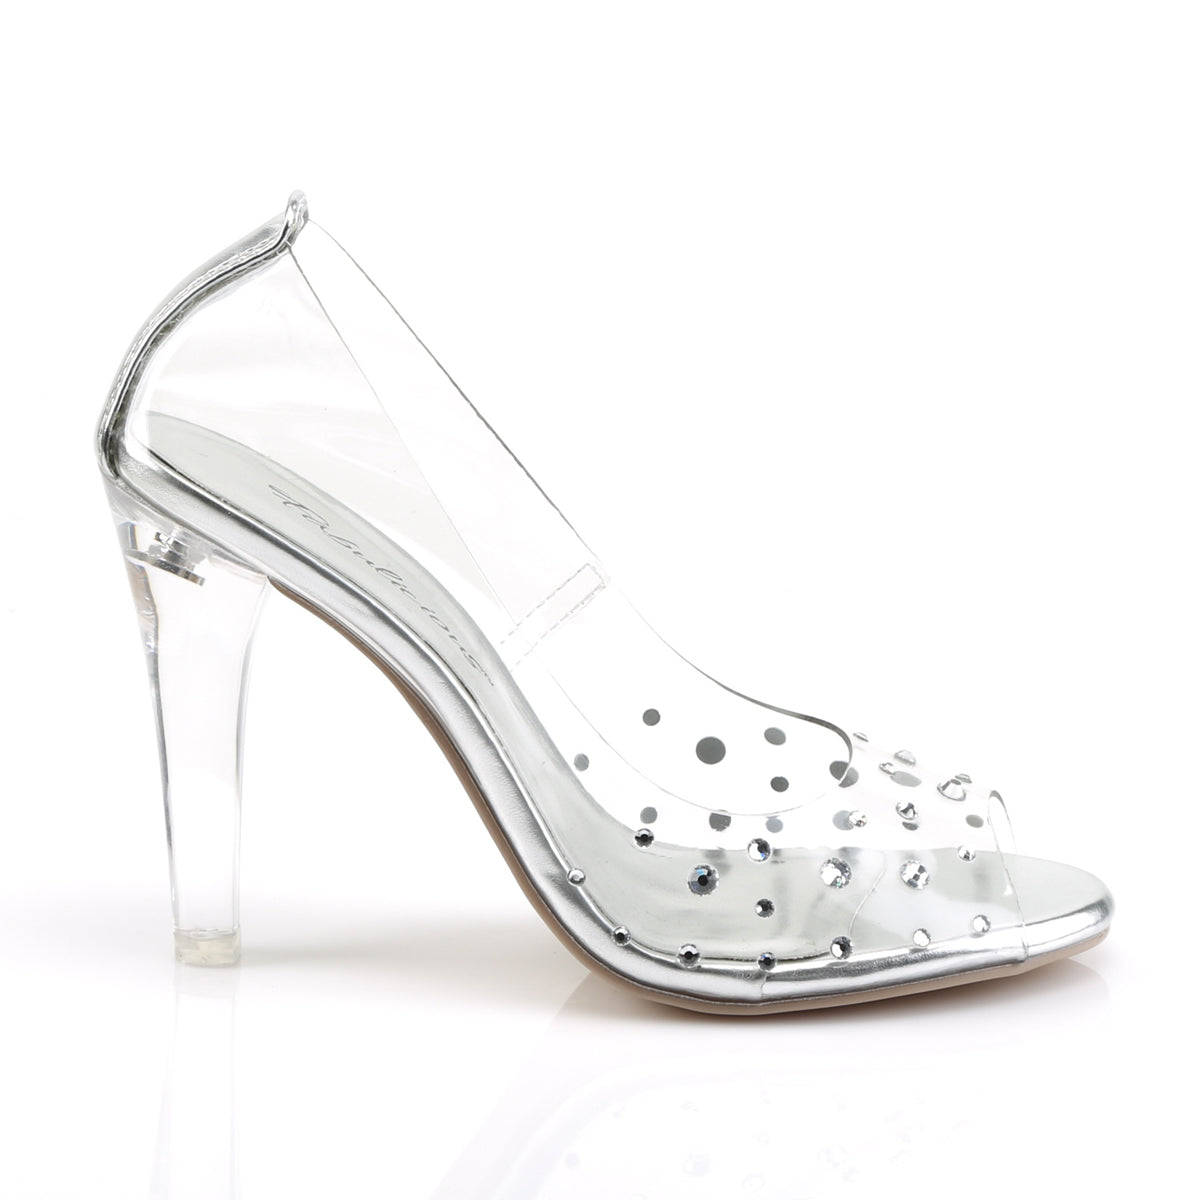 Fabulicious Sandalias para mujer CLEARLY-420 clr lucite